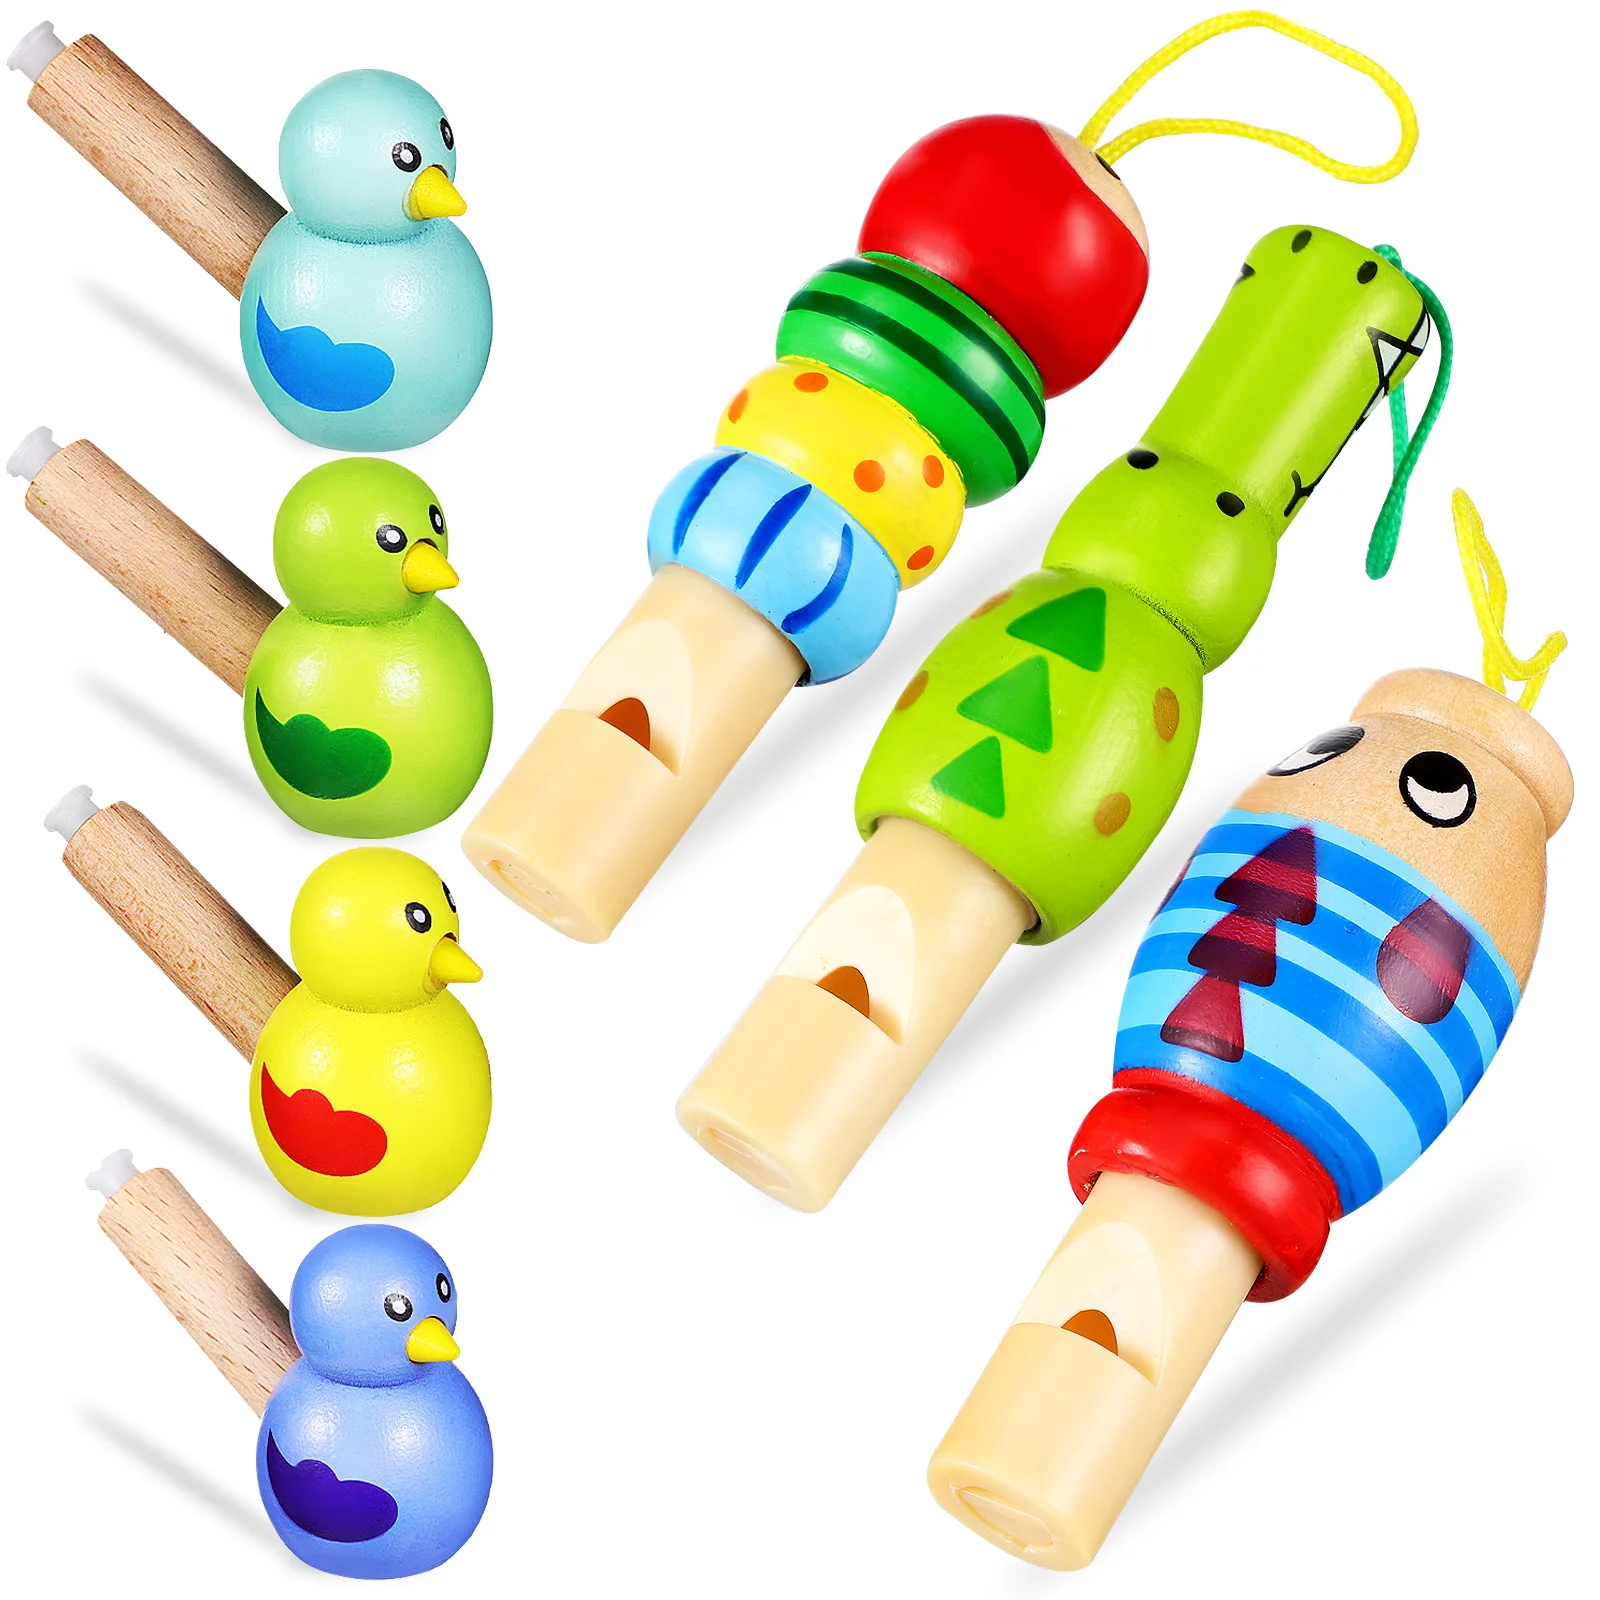 

7 Pcs Animal Whistle Wooden Toys Babies Whistles Toddler Vocalize Kids Child Loud Sound